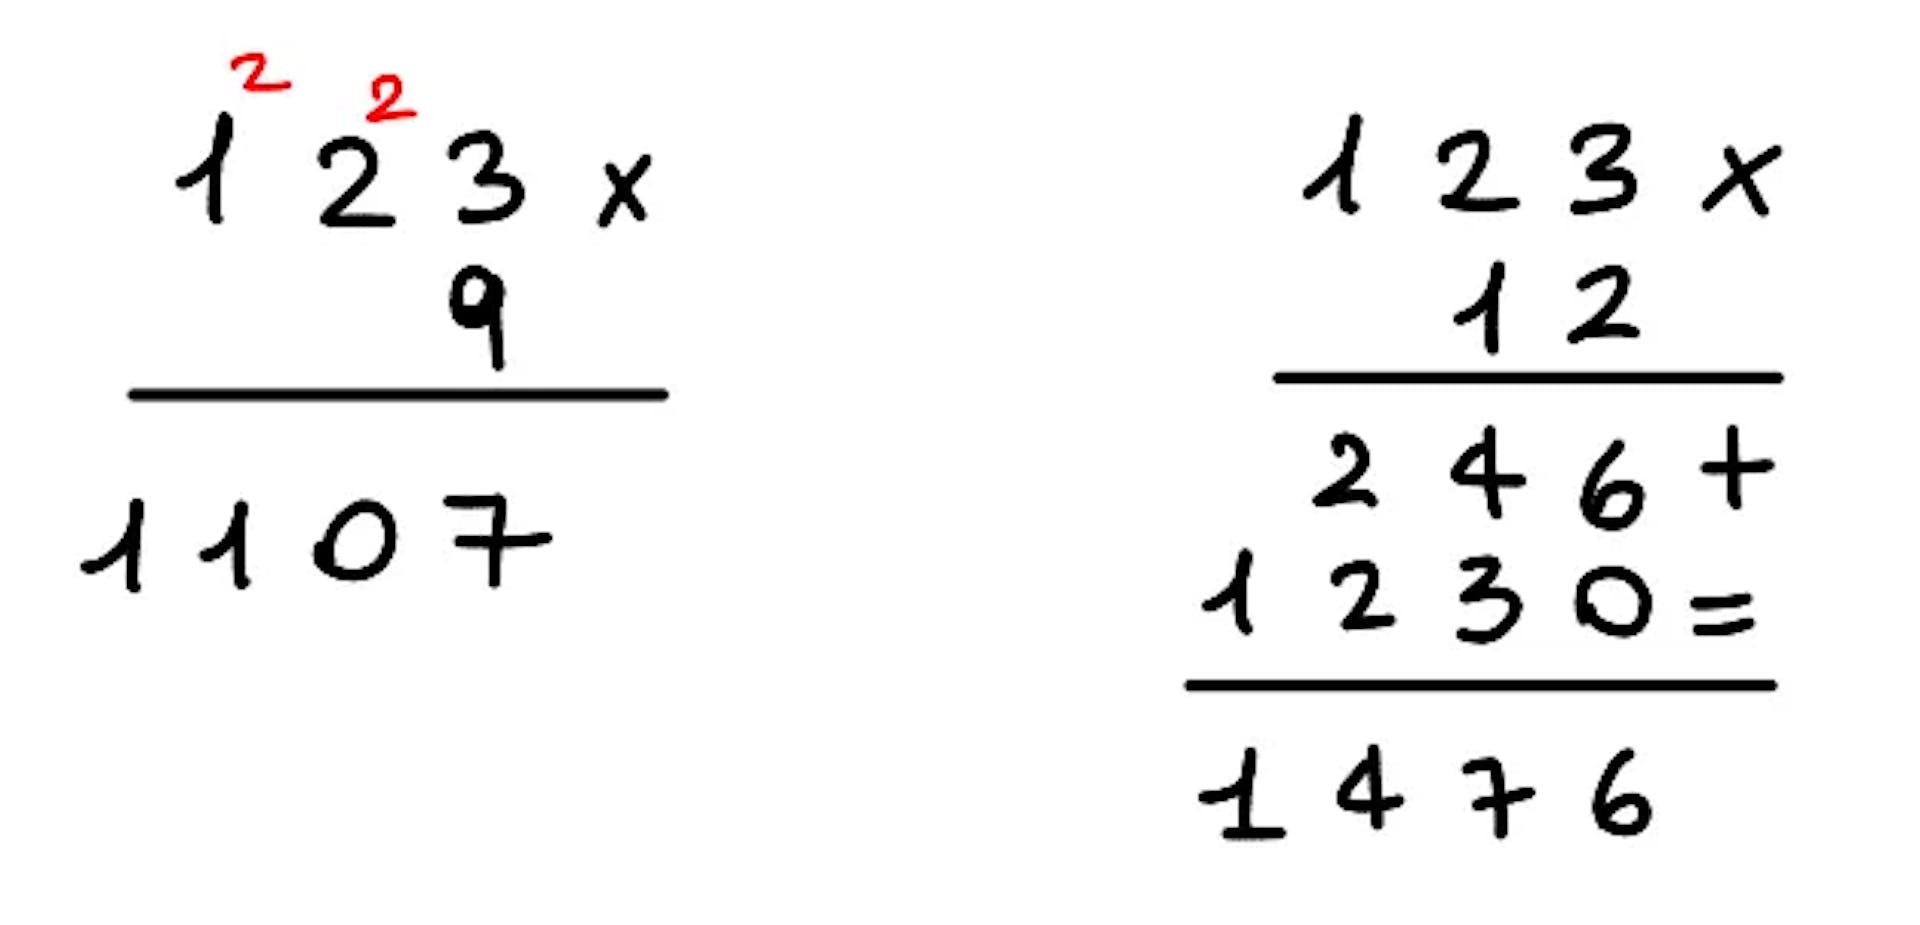 Multiplication examples